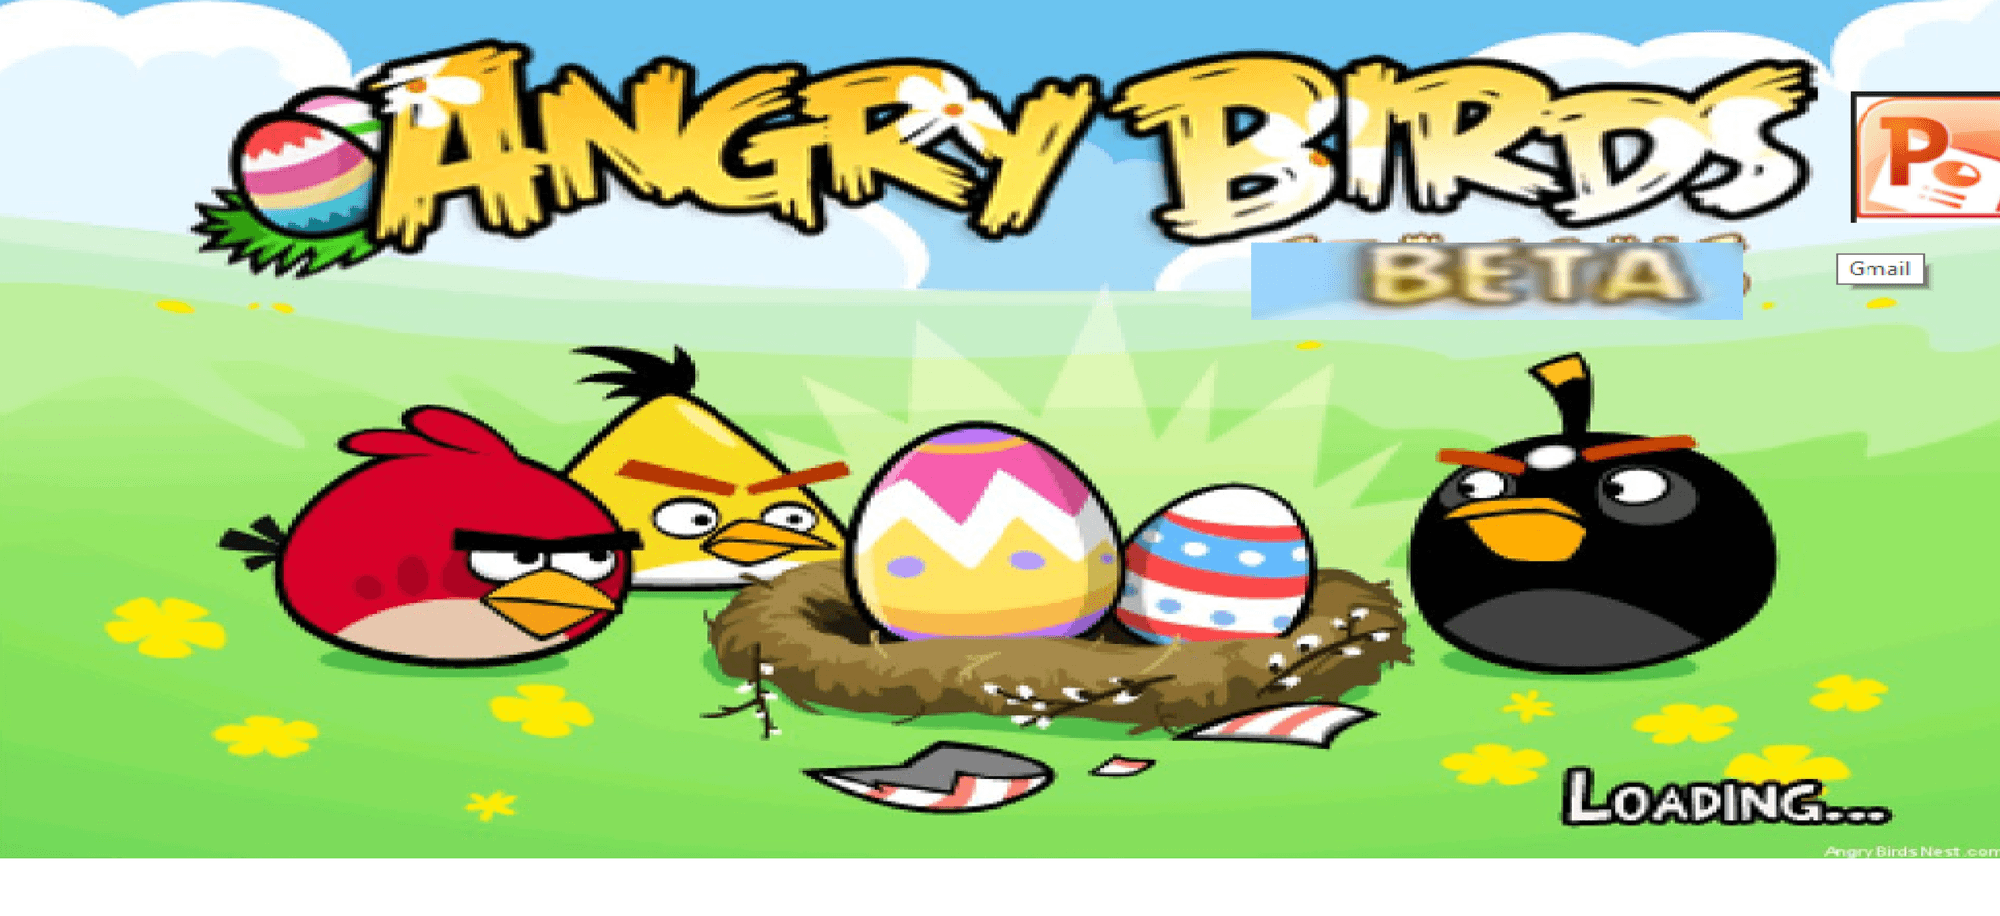 Angry Birds Loading Logo - Angry Birds Powerpoint. Angry Birds Fanon